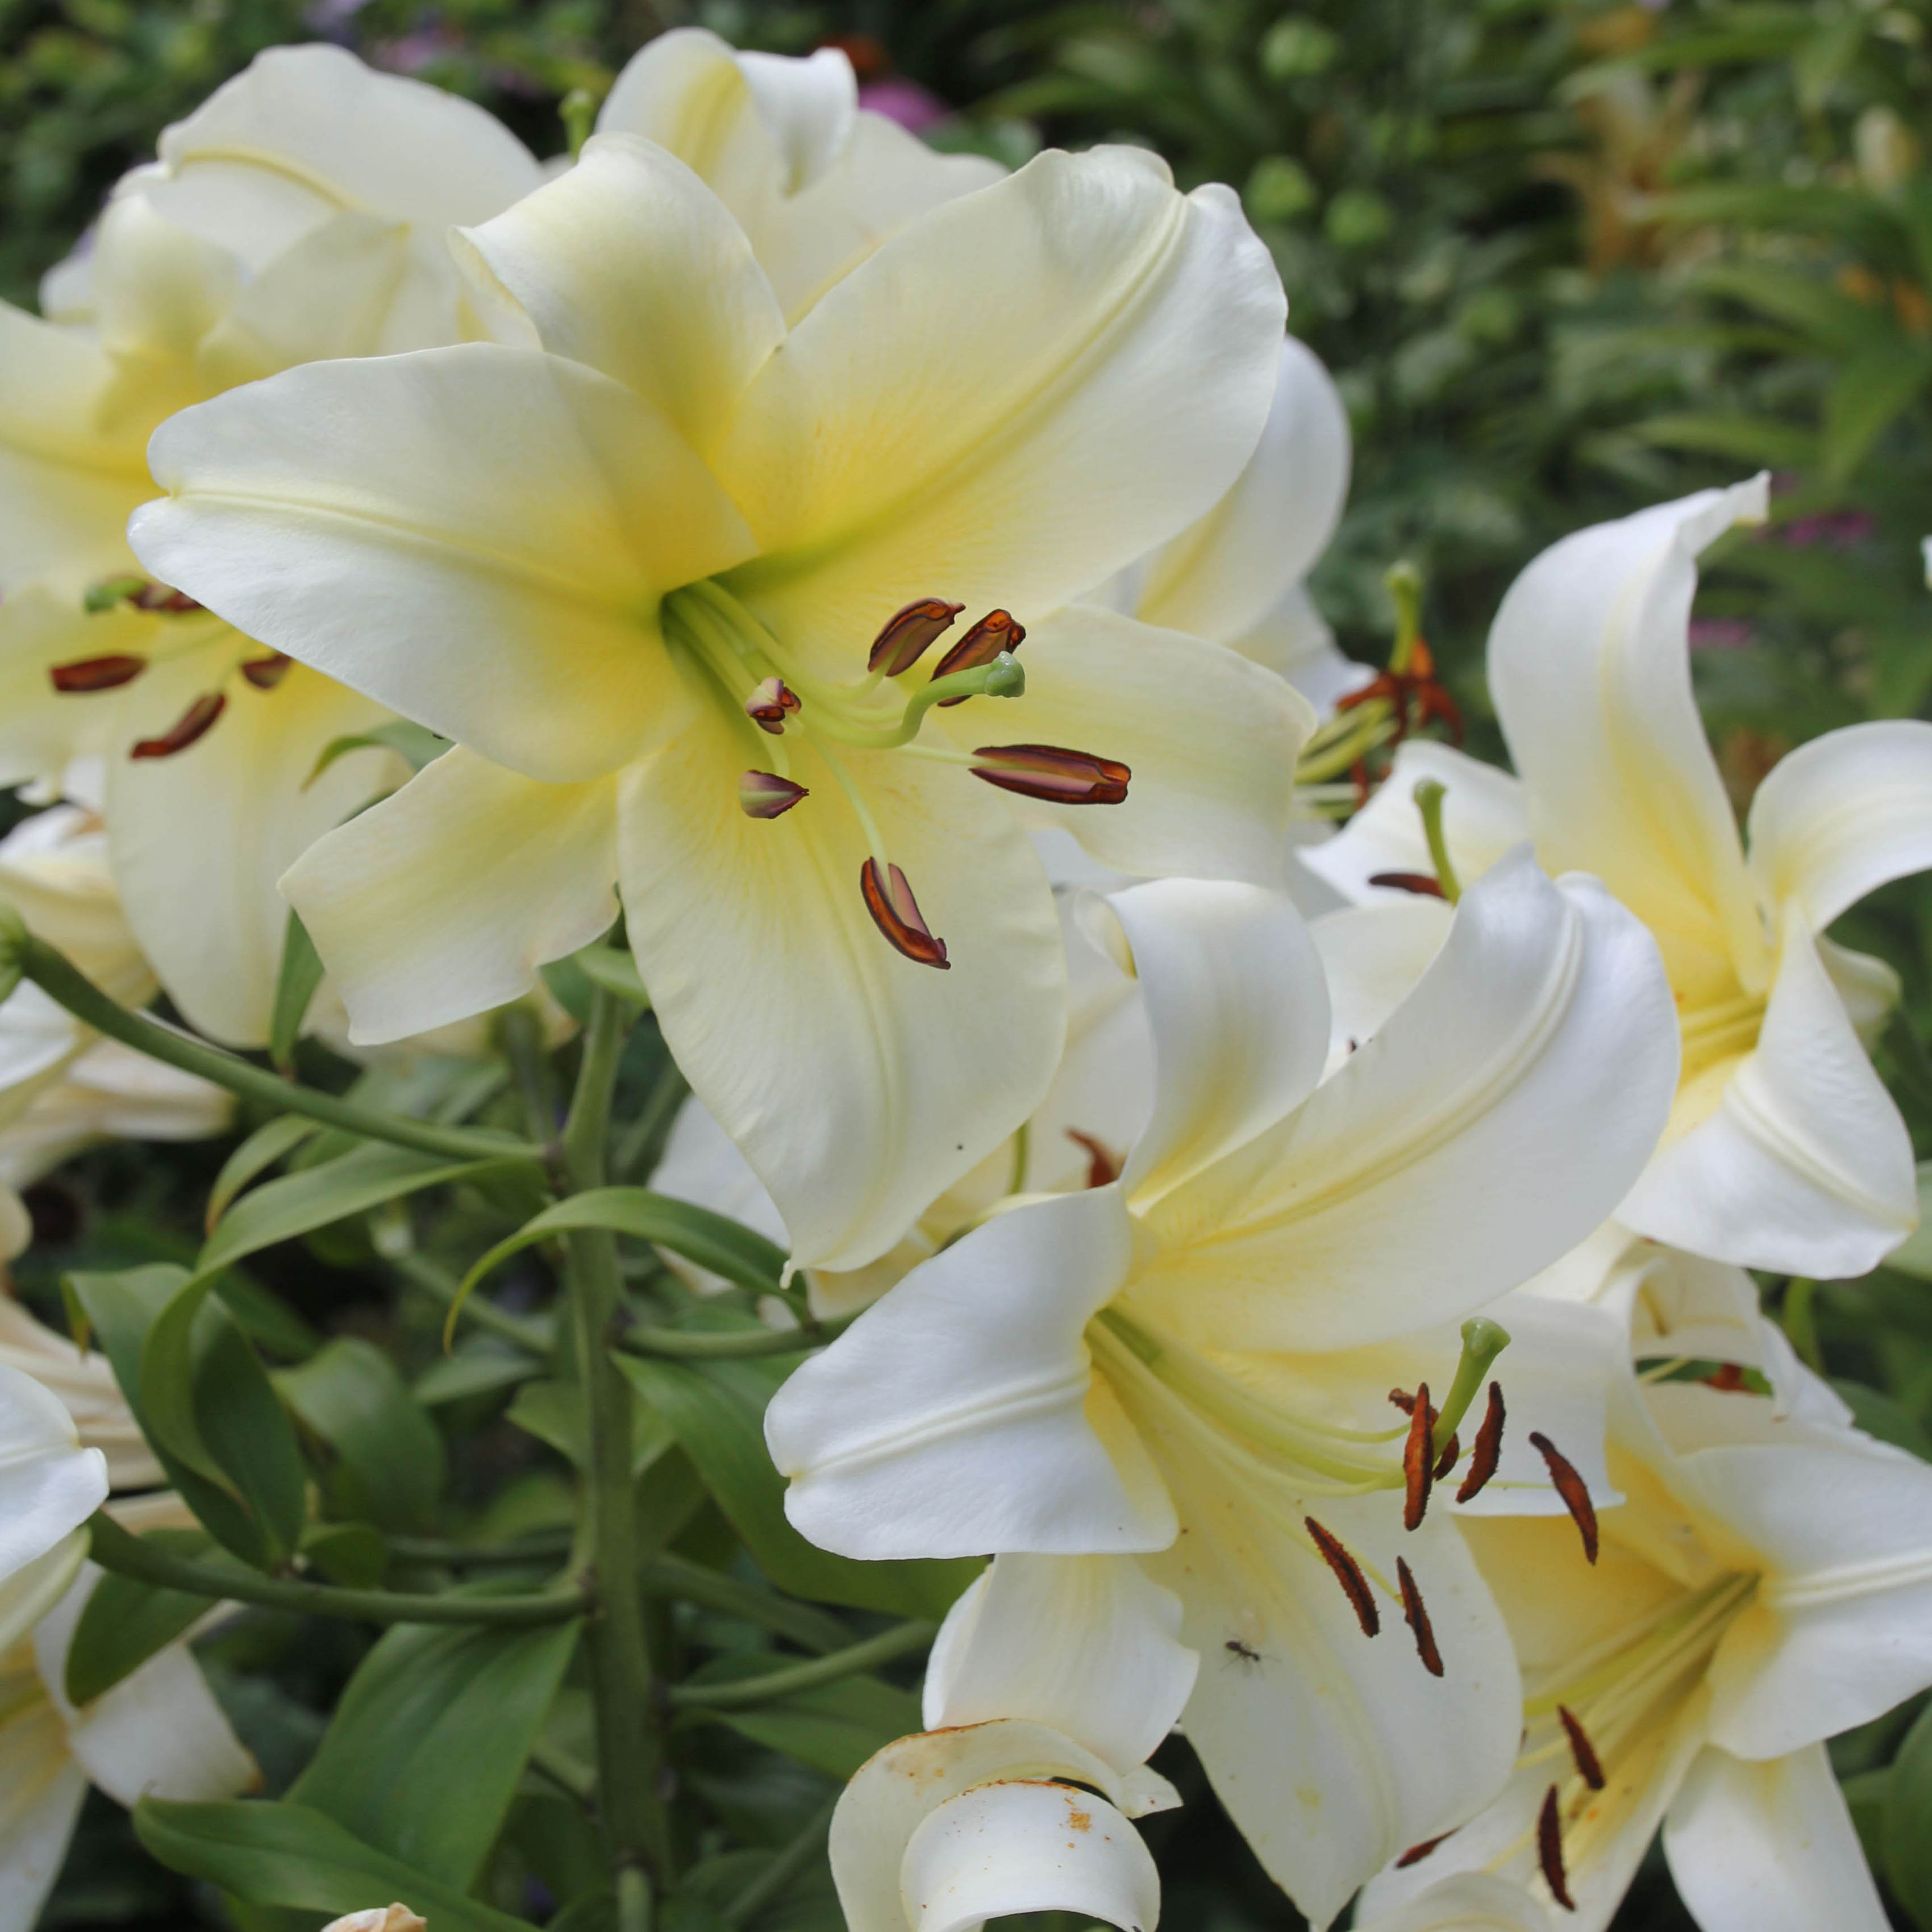 lily with bright white to light yellow flowers